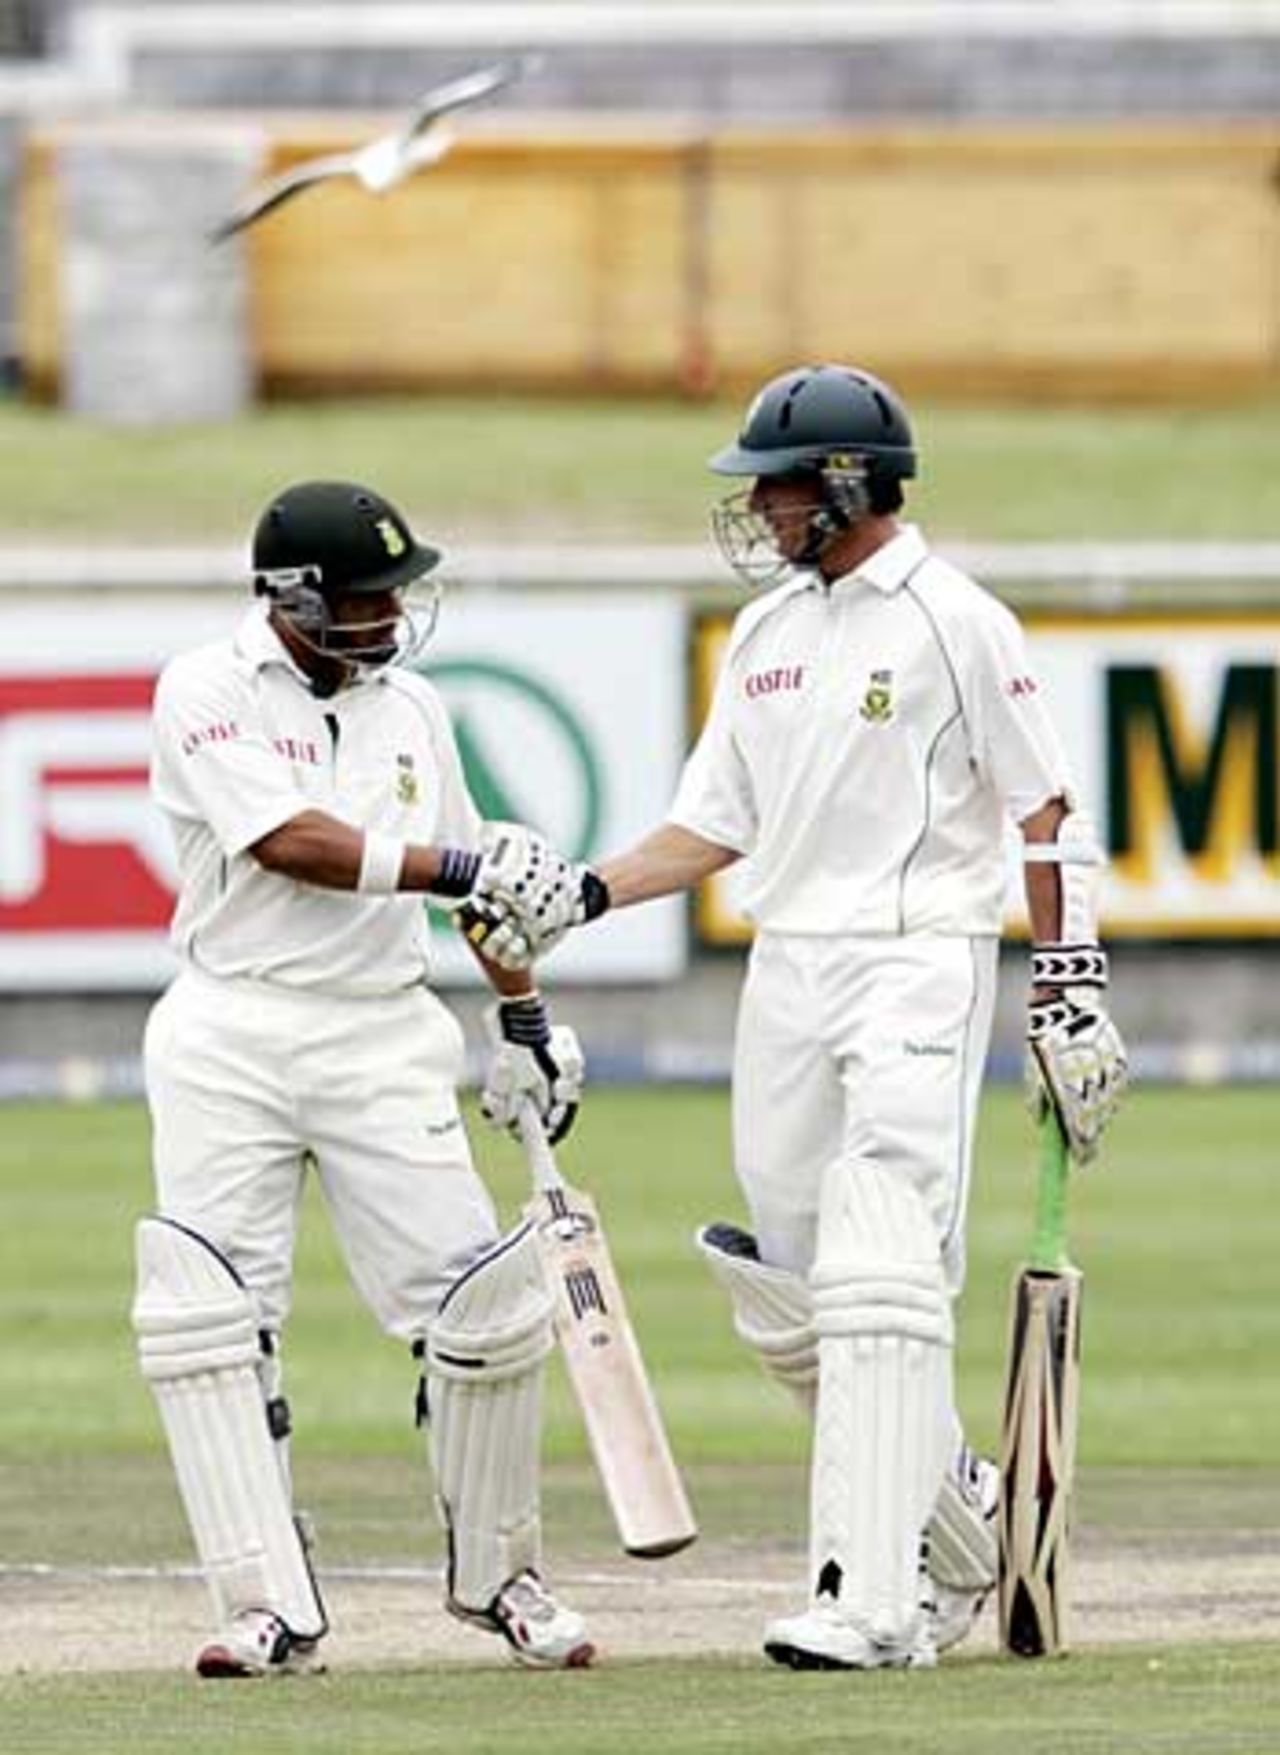 Dale Steyn congratulates Ashwell Prince on his hundred, South Africa v New Zealand, 2nd Test, Cape Town, May 1, 2006
